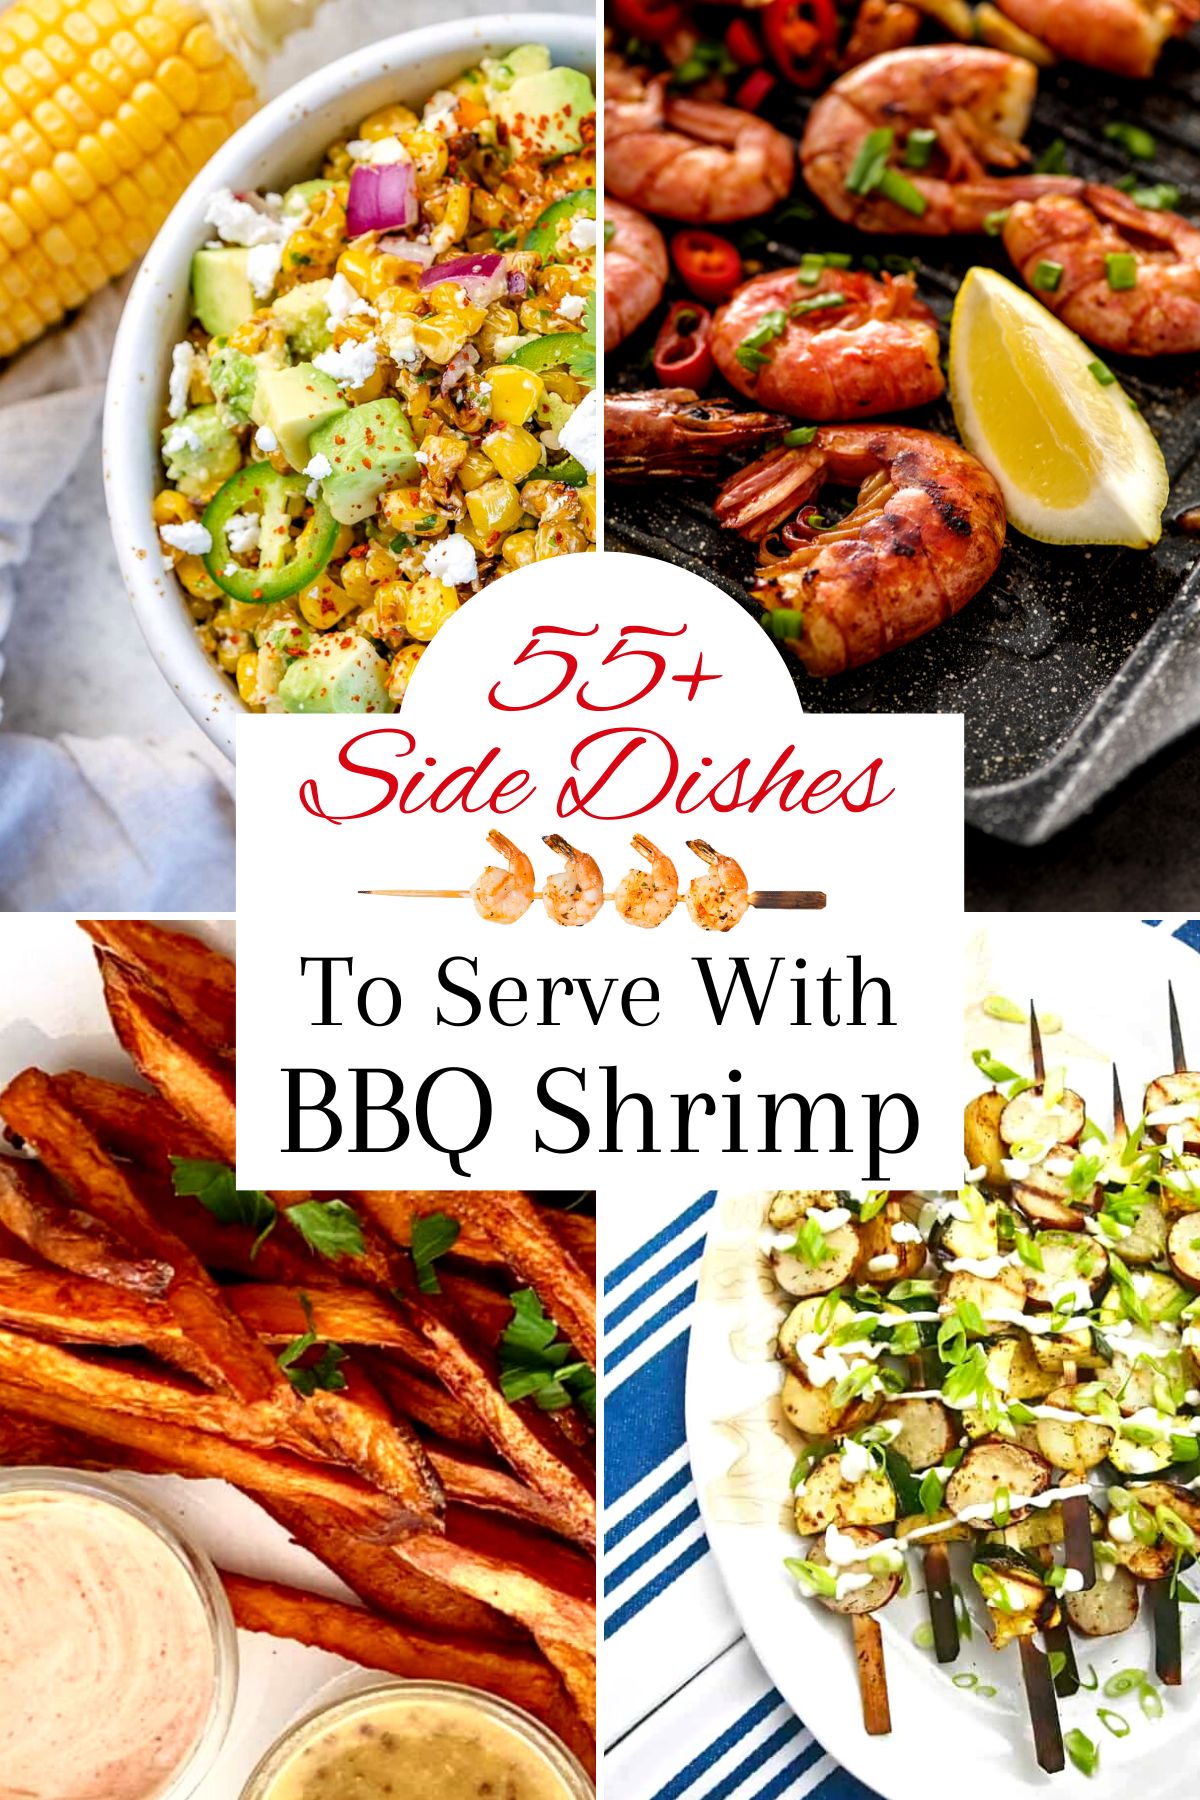 Collage of four recipes including bright pink bbq shrimp, a salad of yellow corn, orange sweet potato fries with spicy mayo dip and skewered potato salad ingredients that have been grilled.